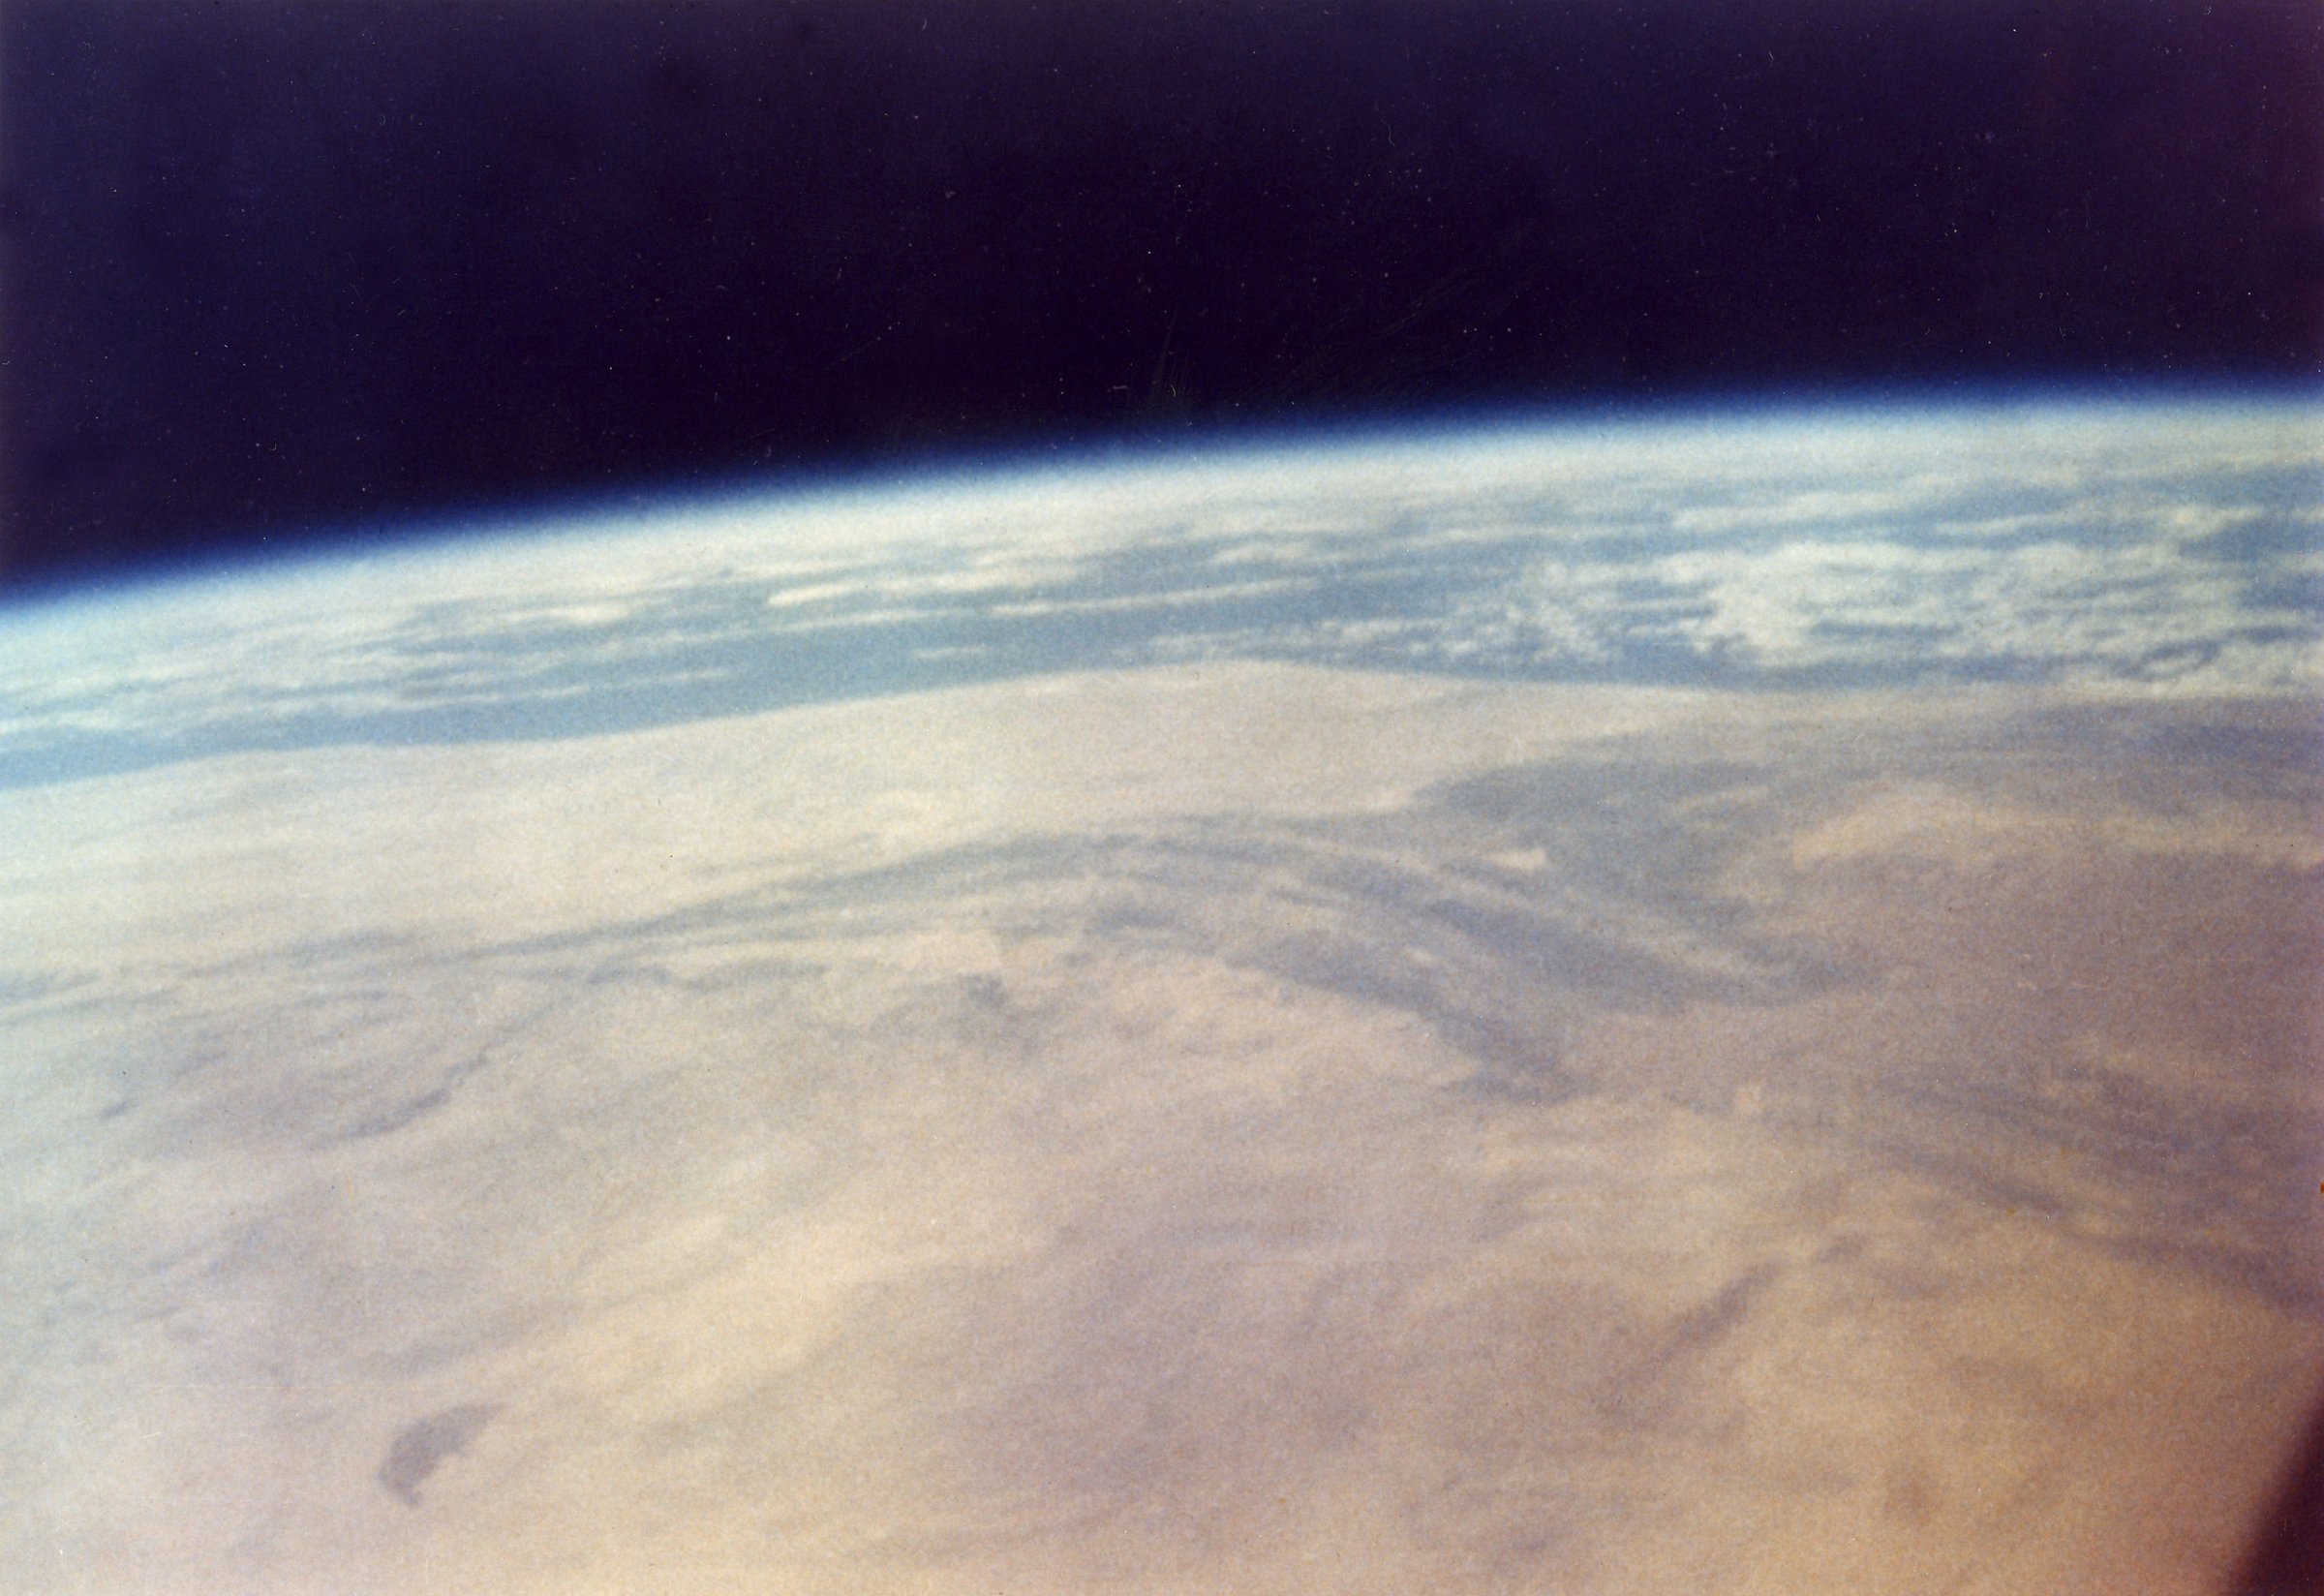 Color photograph of North Africa from space, taken by John Glenn in the Friendship 7 spacecraft during NASA's Project Mercury MA-6 mission, Feb. 20, 1962